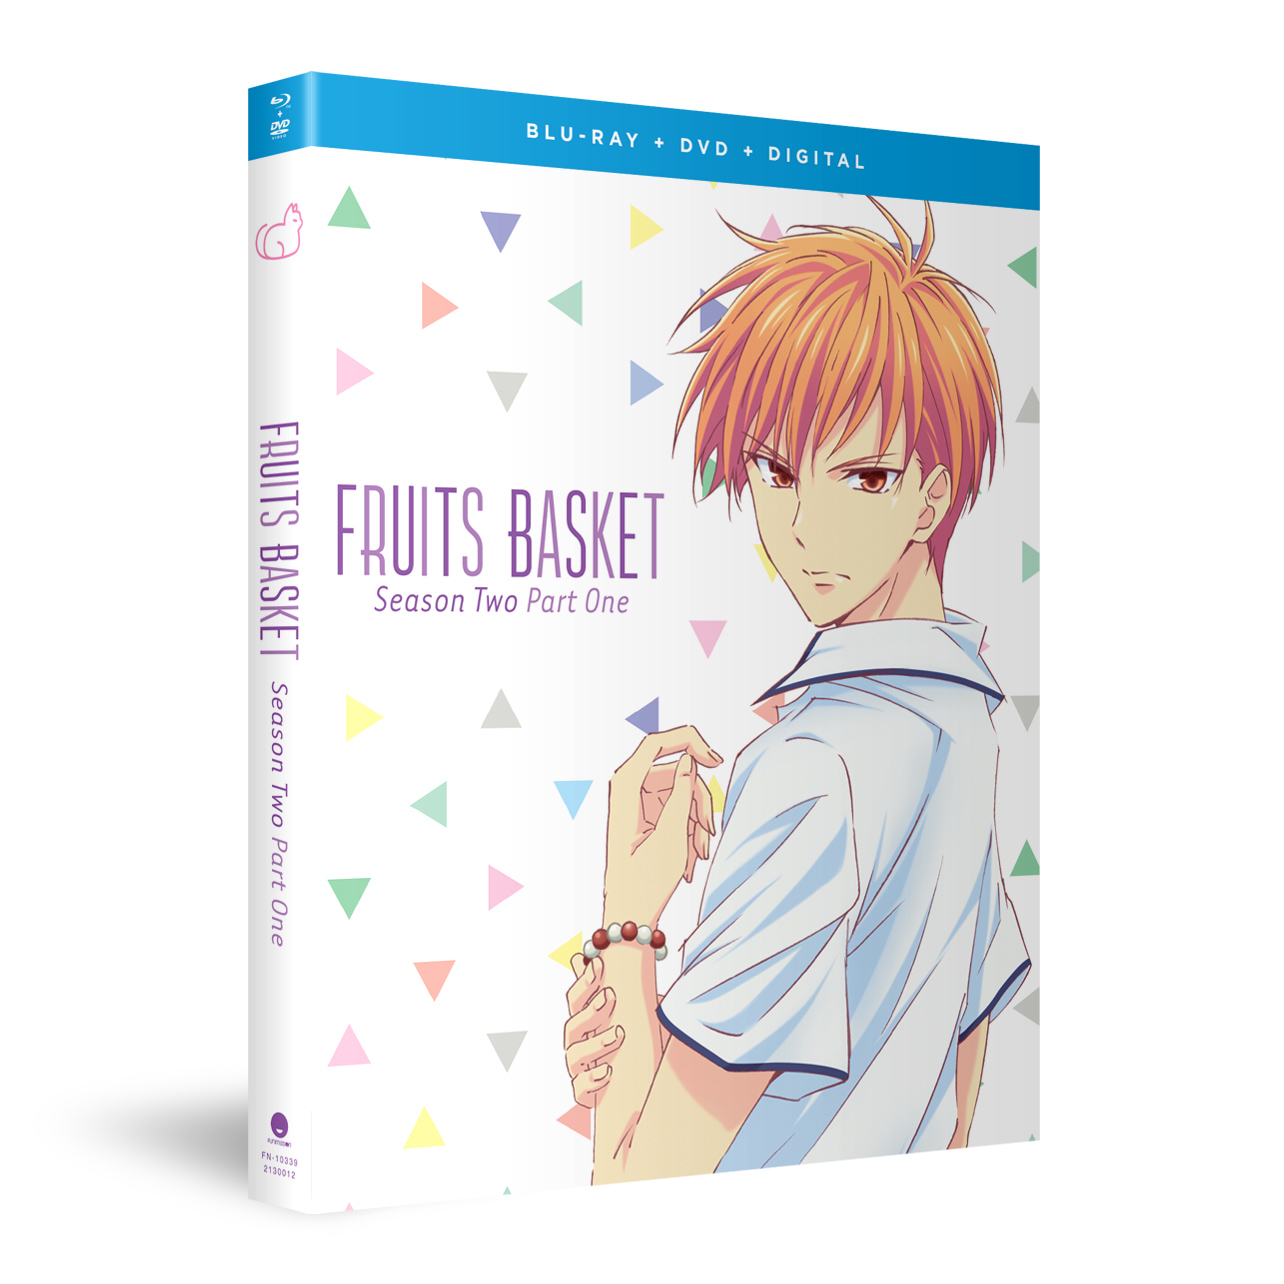 Fruits Basket (2019) - Season 2 Part 1 - Limited Edition - Blu-ray + DVD image count 7